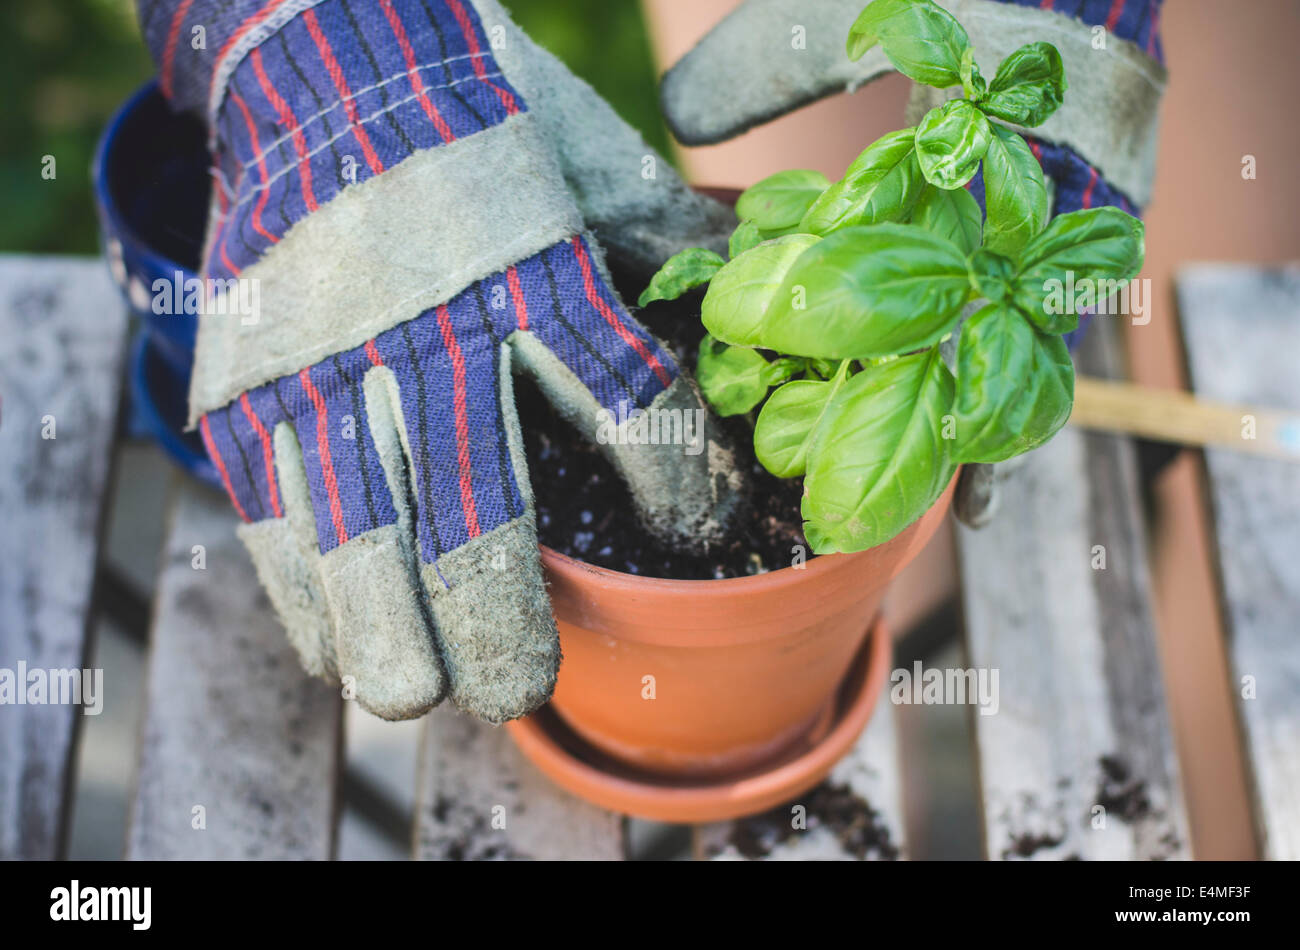 Gloved Hands Placing Plant and Soil in Terracotta Pot Stock Photo